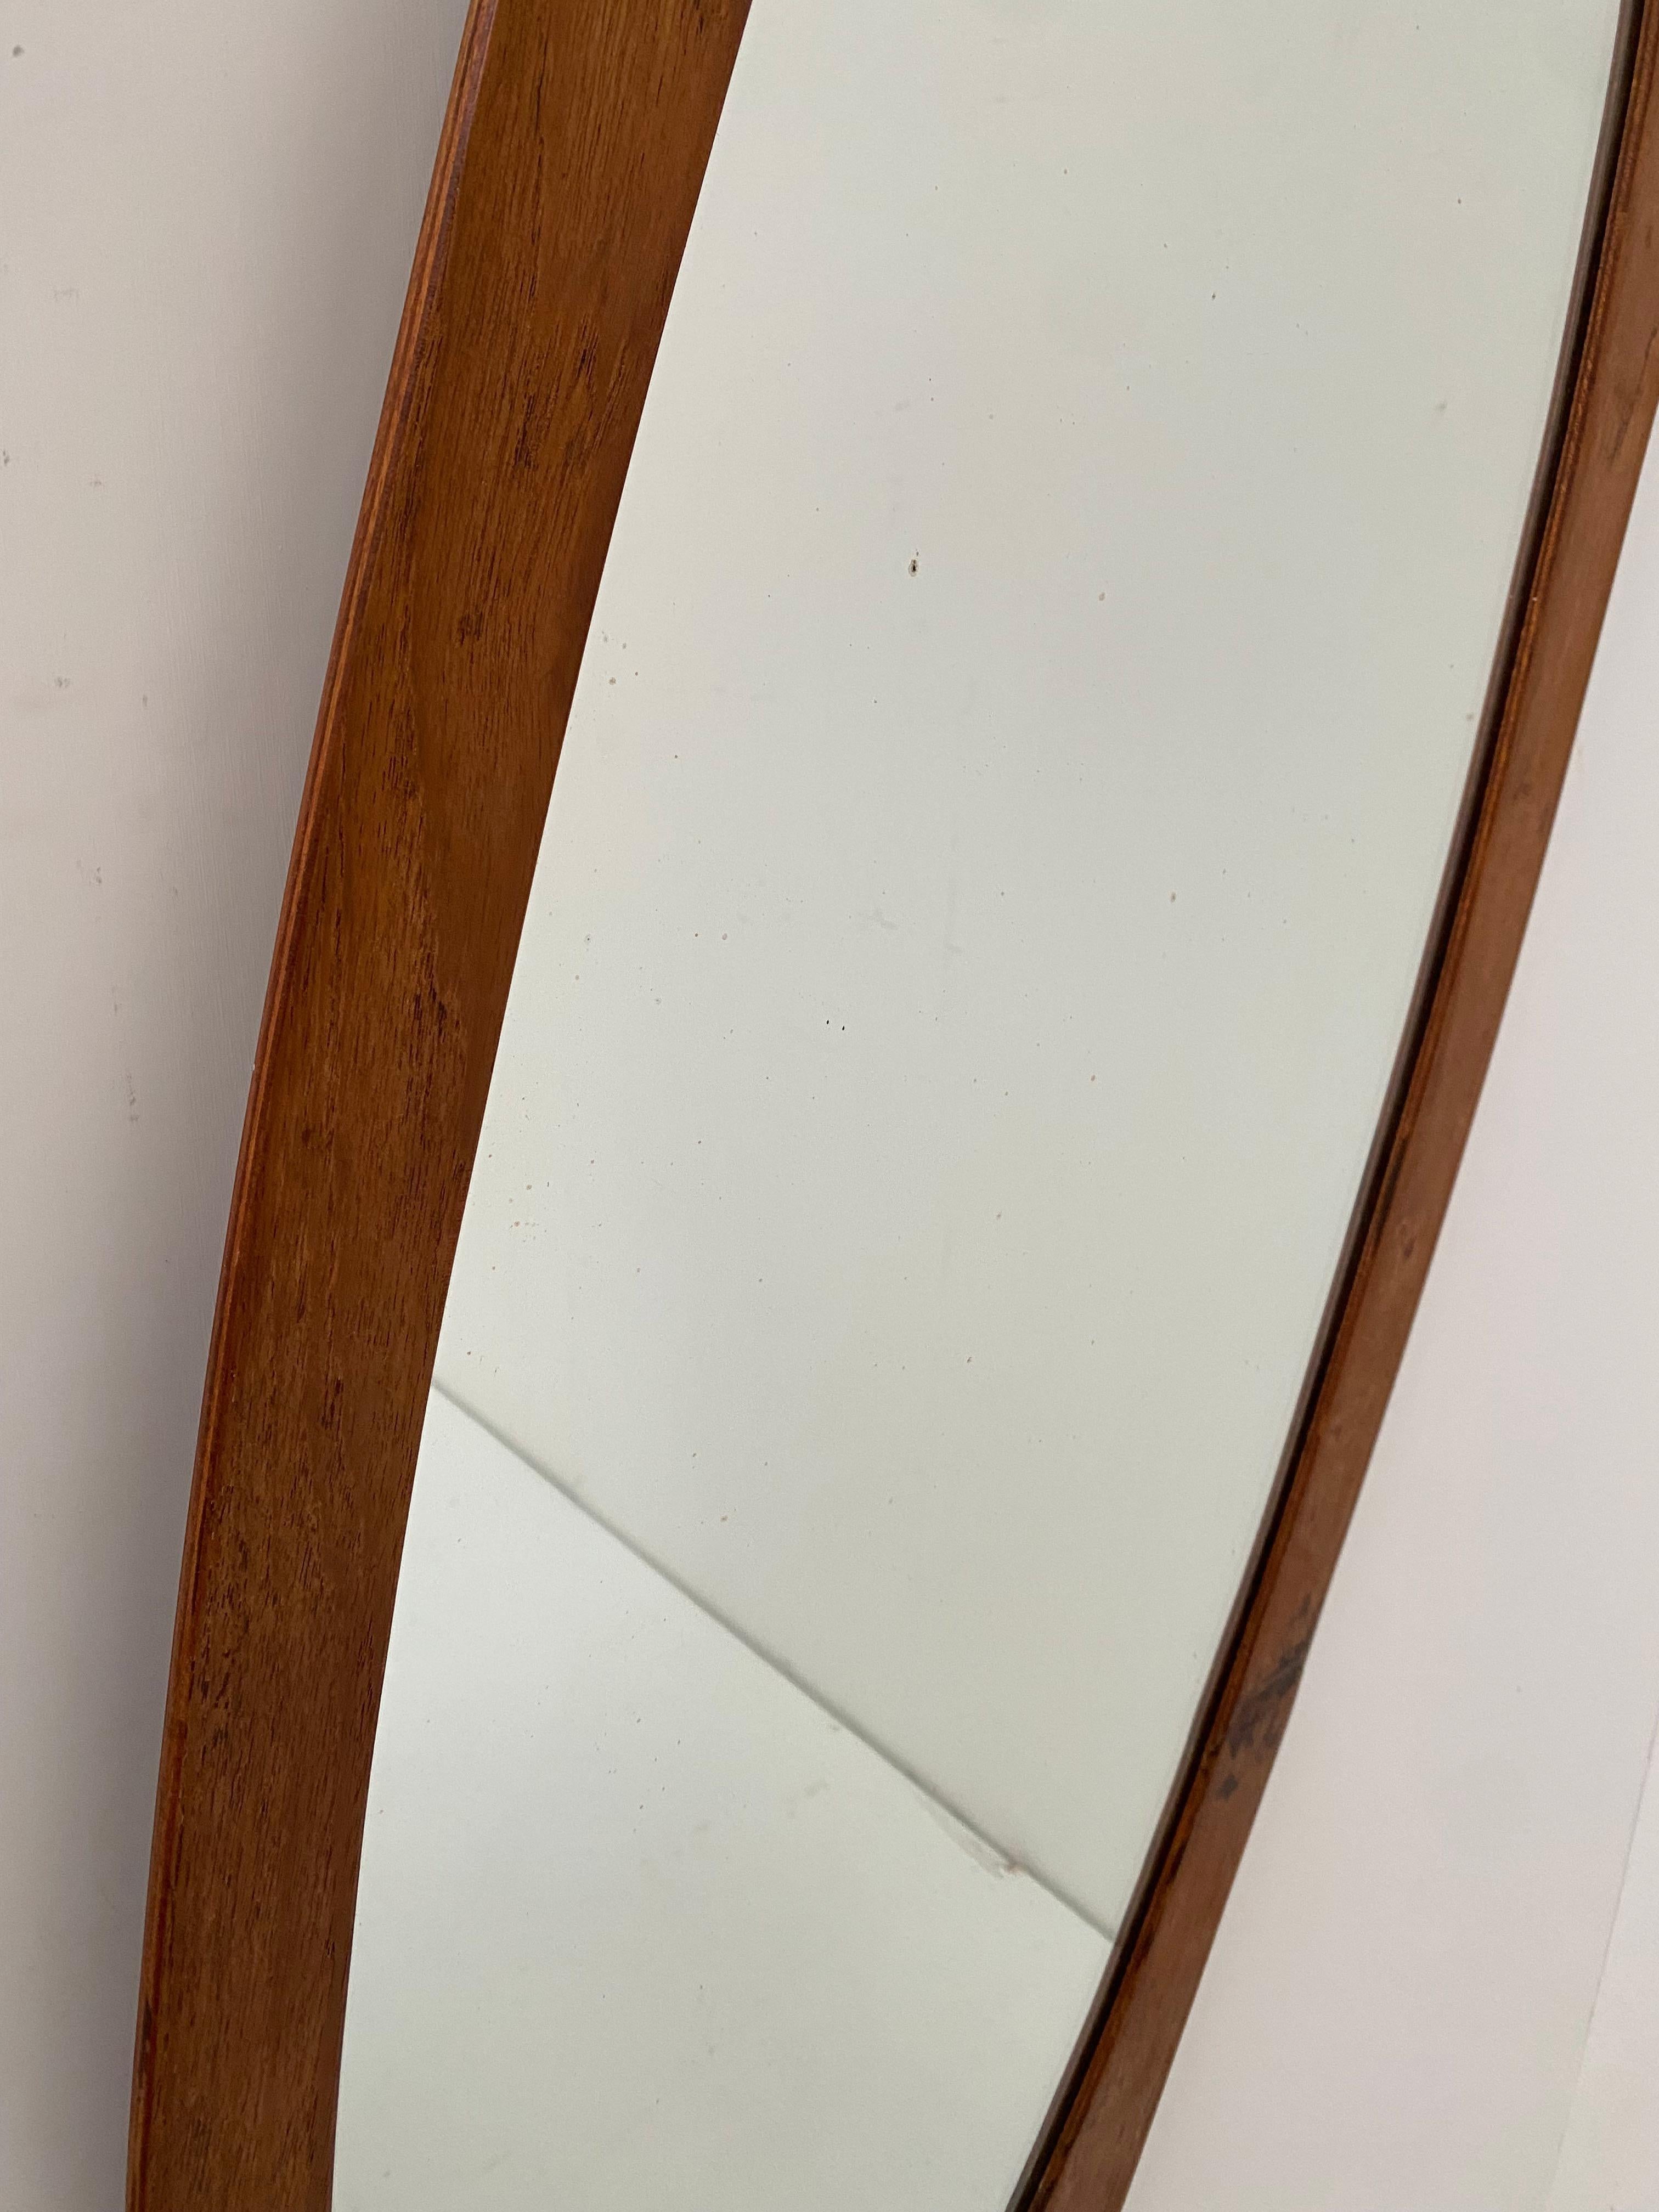 Italian Campo & Graffi Wallmounted Teak Plywood Mirror for HOME Italy 1950's For Sale